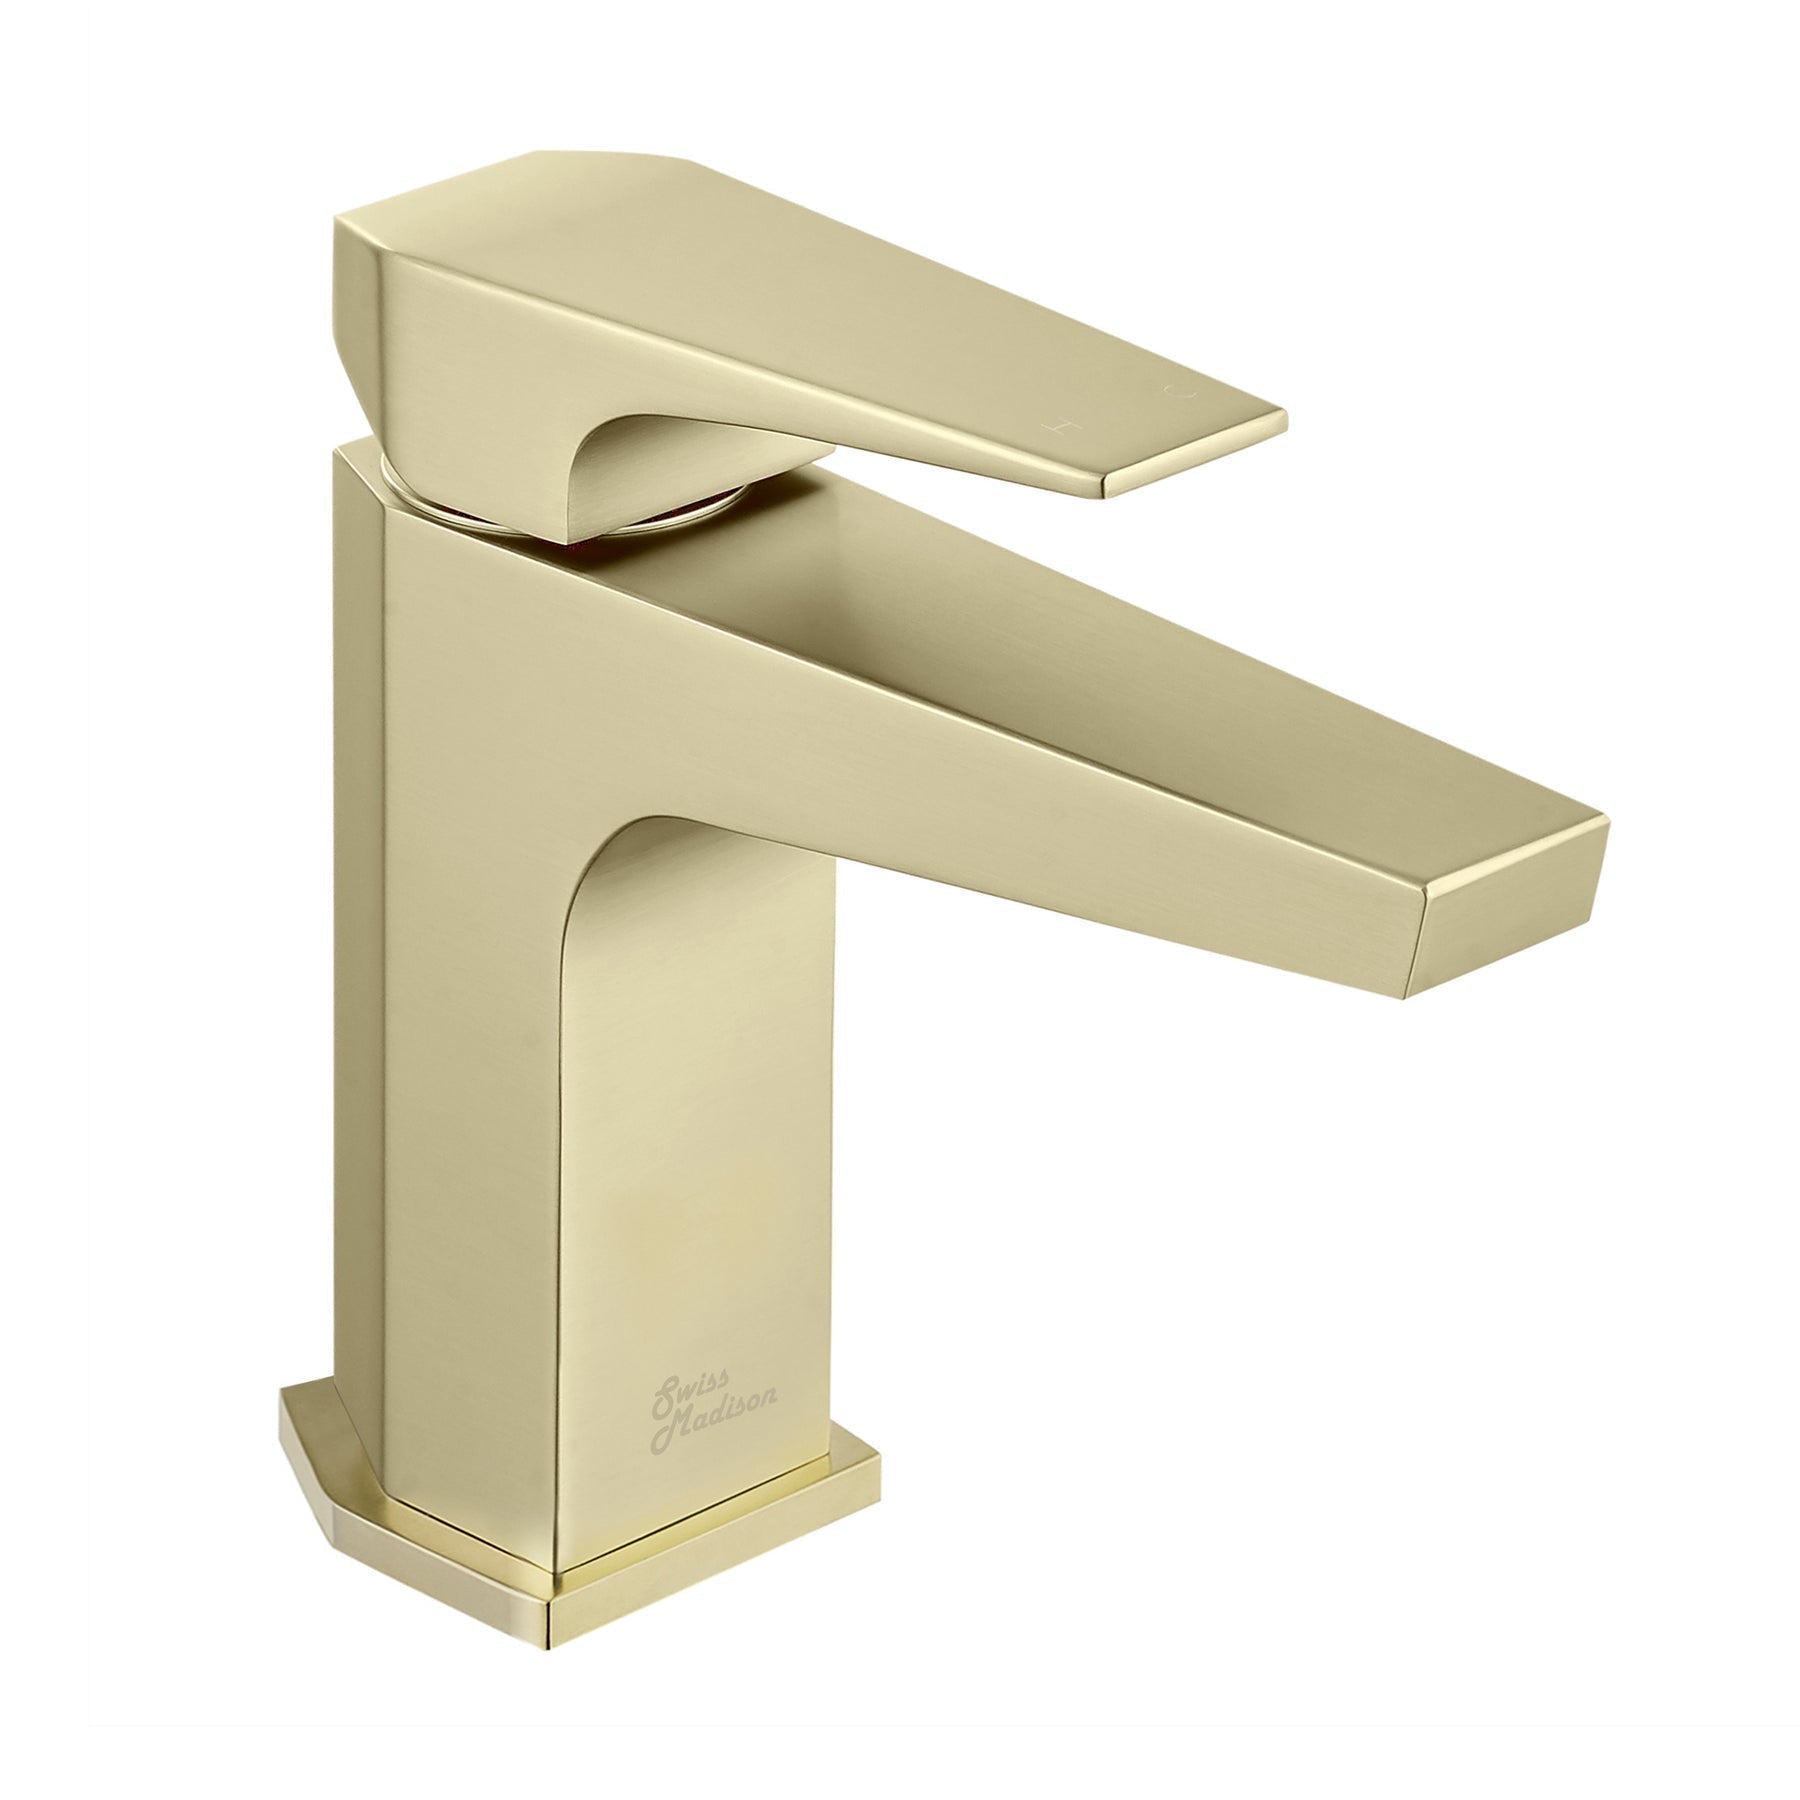 Swiss Madison Voltaire Single Hole, Single-Handle, Bathroom Faucet SM-BF40